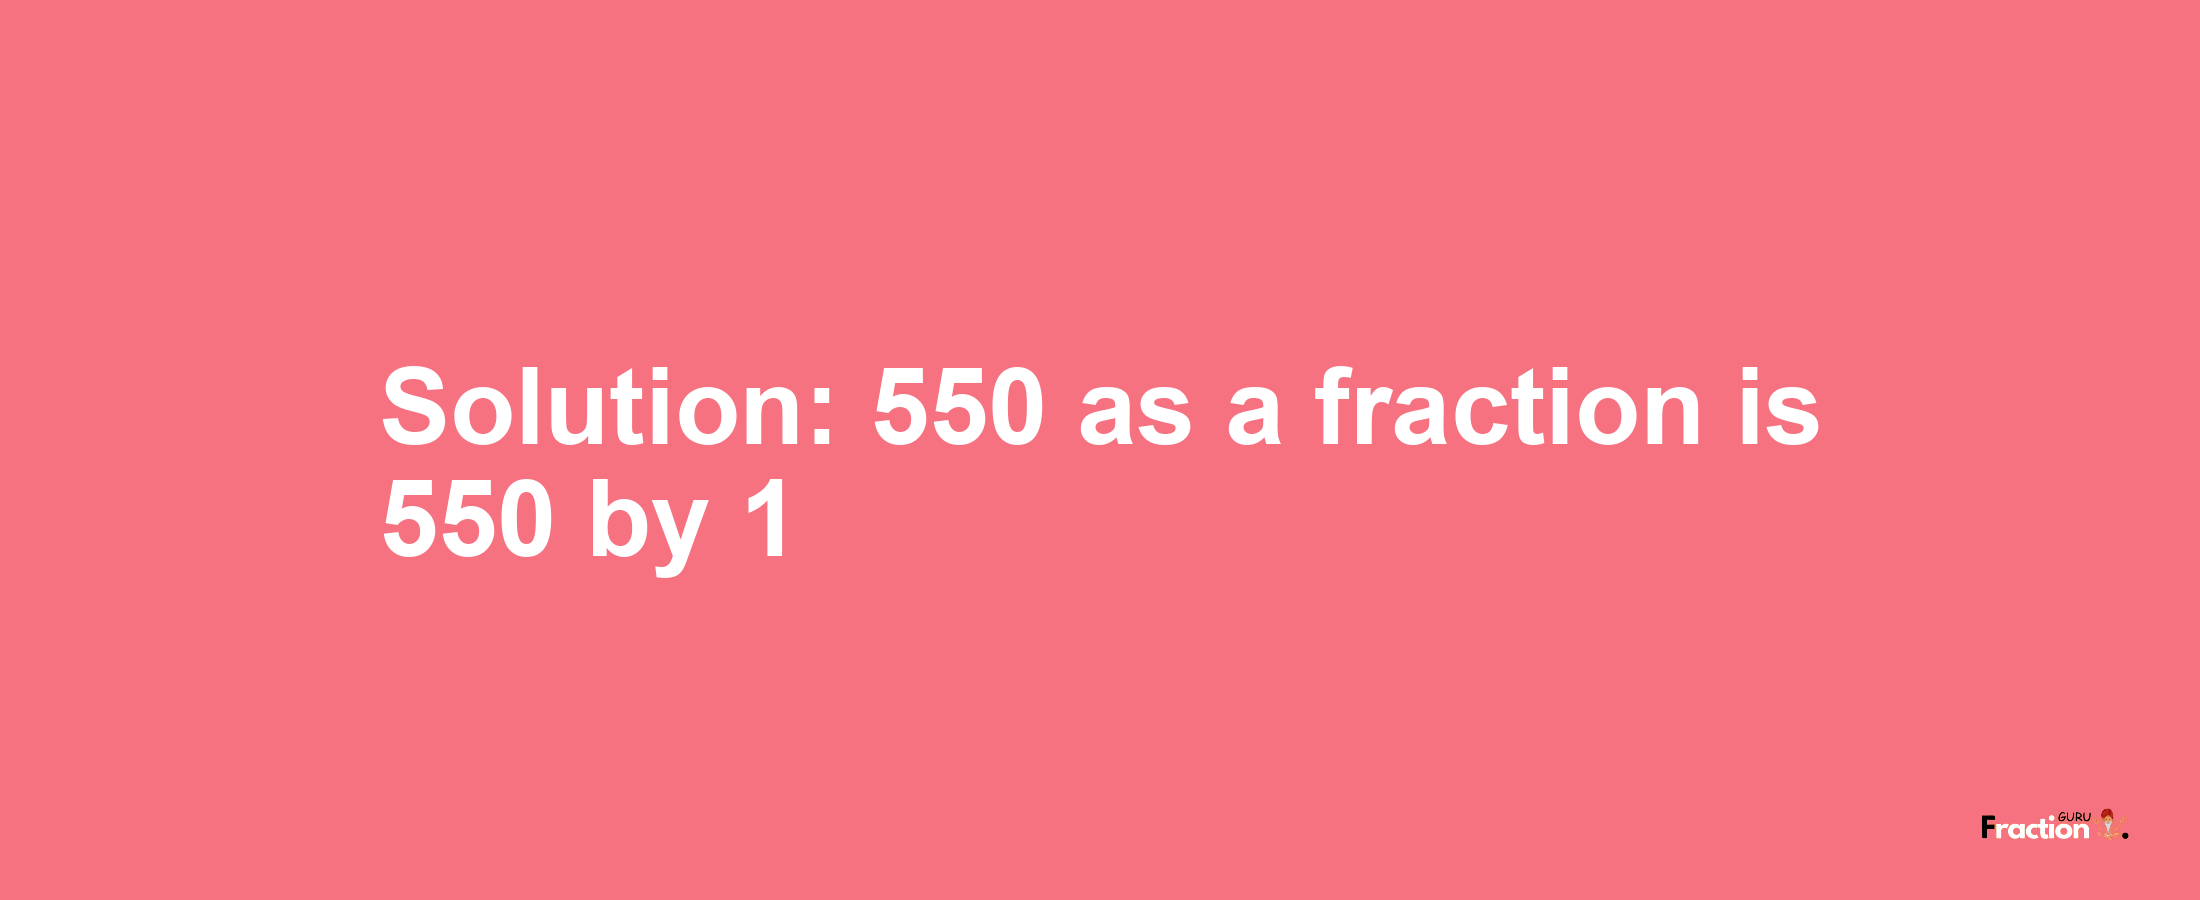 Solution:550 as a fraction is 550/1